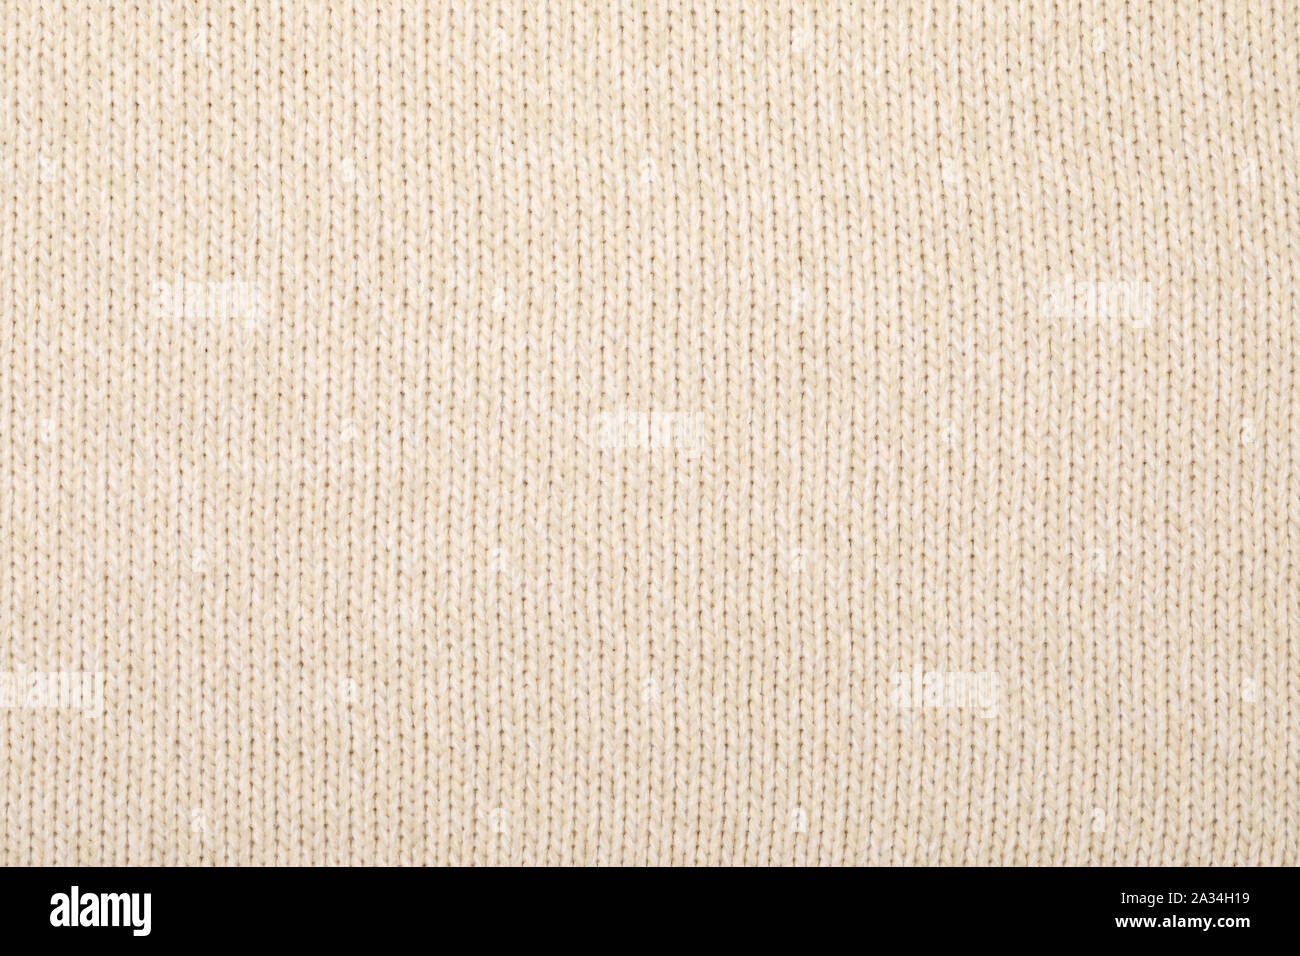 https://c8.alamy.com/comp/2A34H19/real-beige-melange-or-ombre-knitted-fabric-with-ornamental-pattern-textured-background-2A34H19.jpg